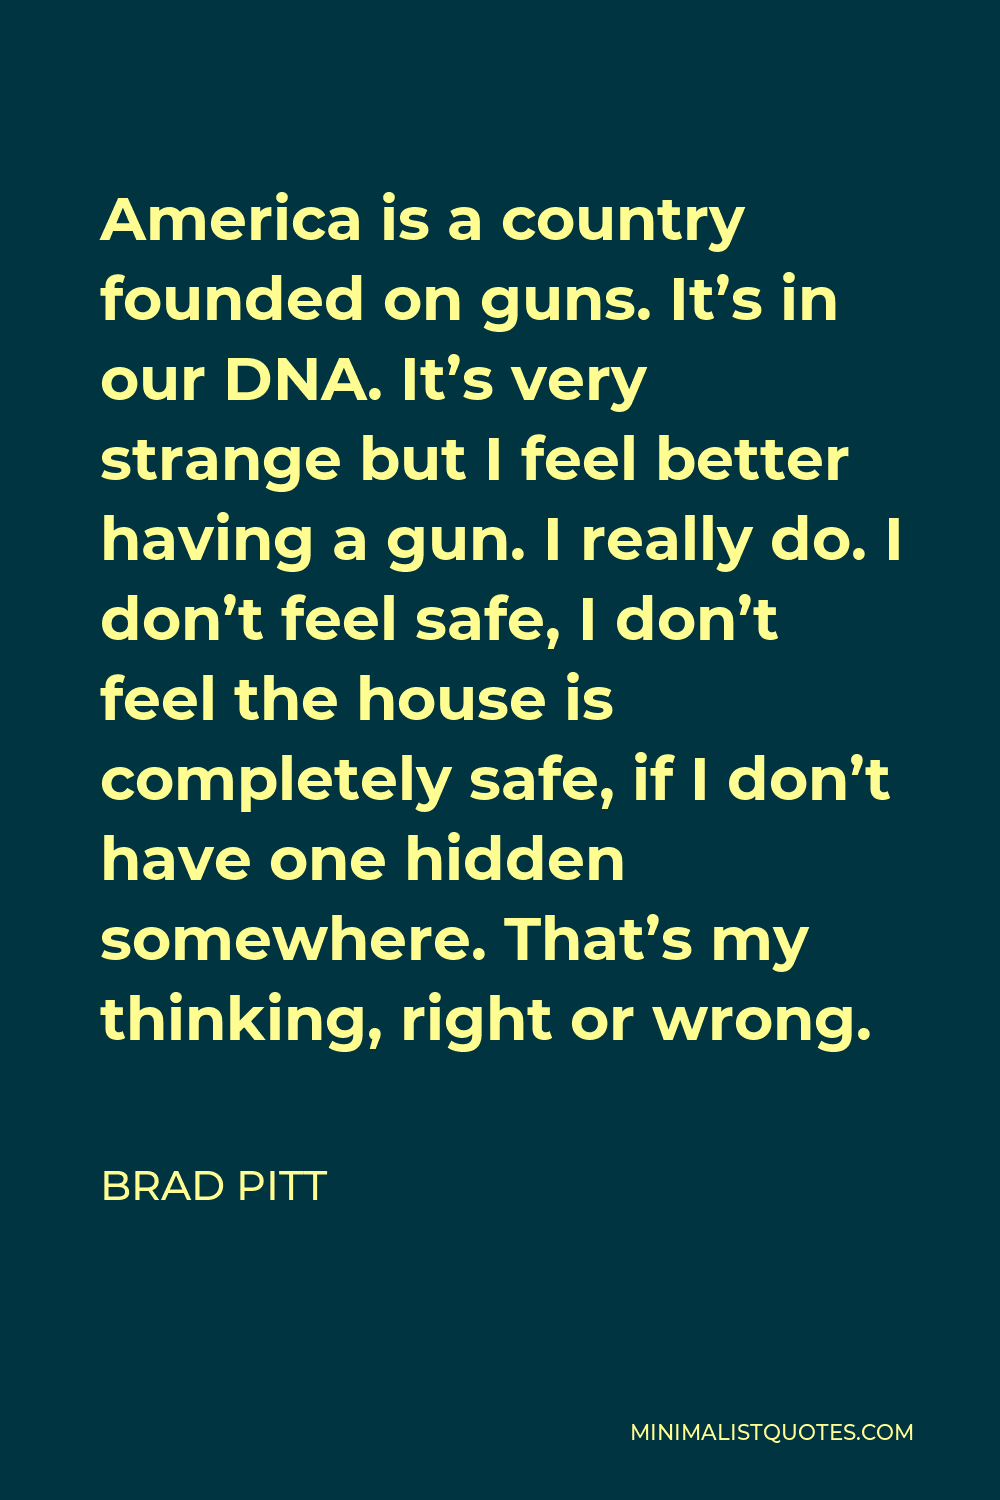 Brad Pitt Quote - America is a country founded on guns. It’s in our DNA. It’s very strange but I feel better having a gun. I really do. I don’t feel safe, I don’t feel the house is completely safe, if I don’t have one hidden somewhere. That’s my thinking, right or wrong.